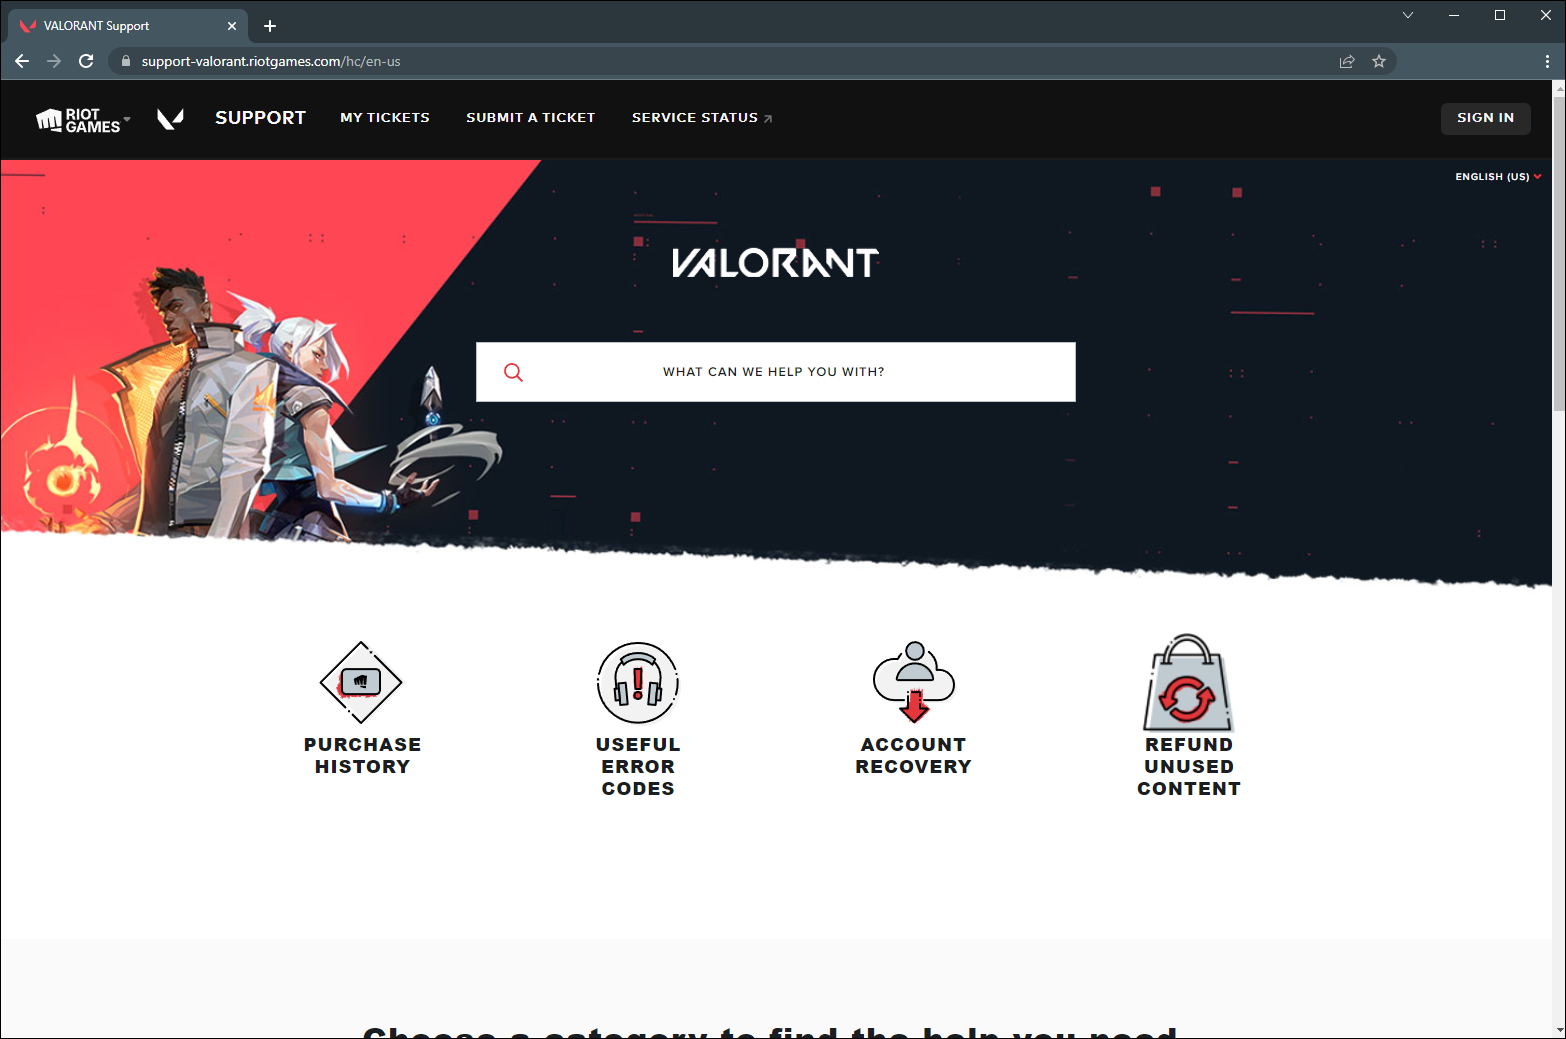 Valorant support page